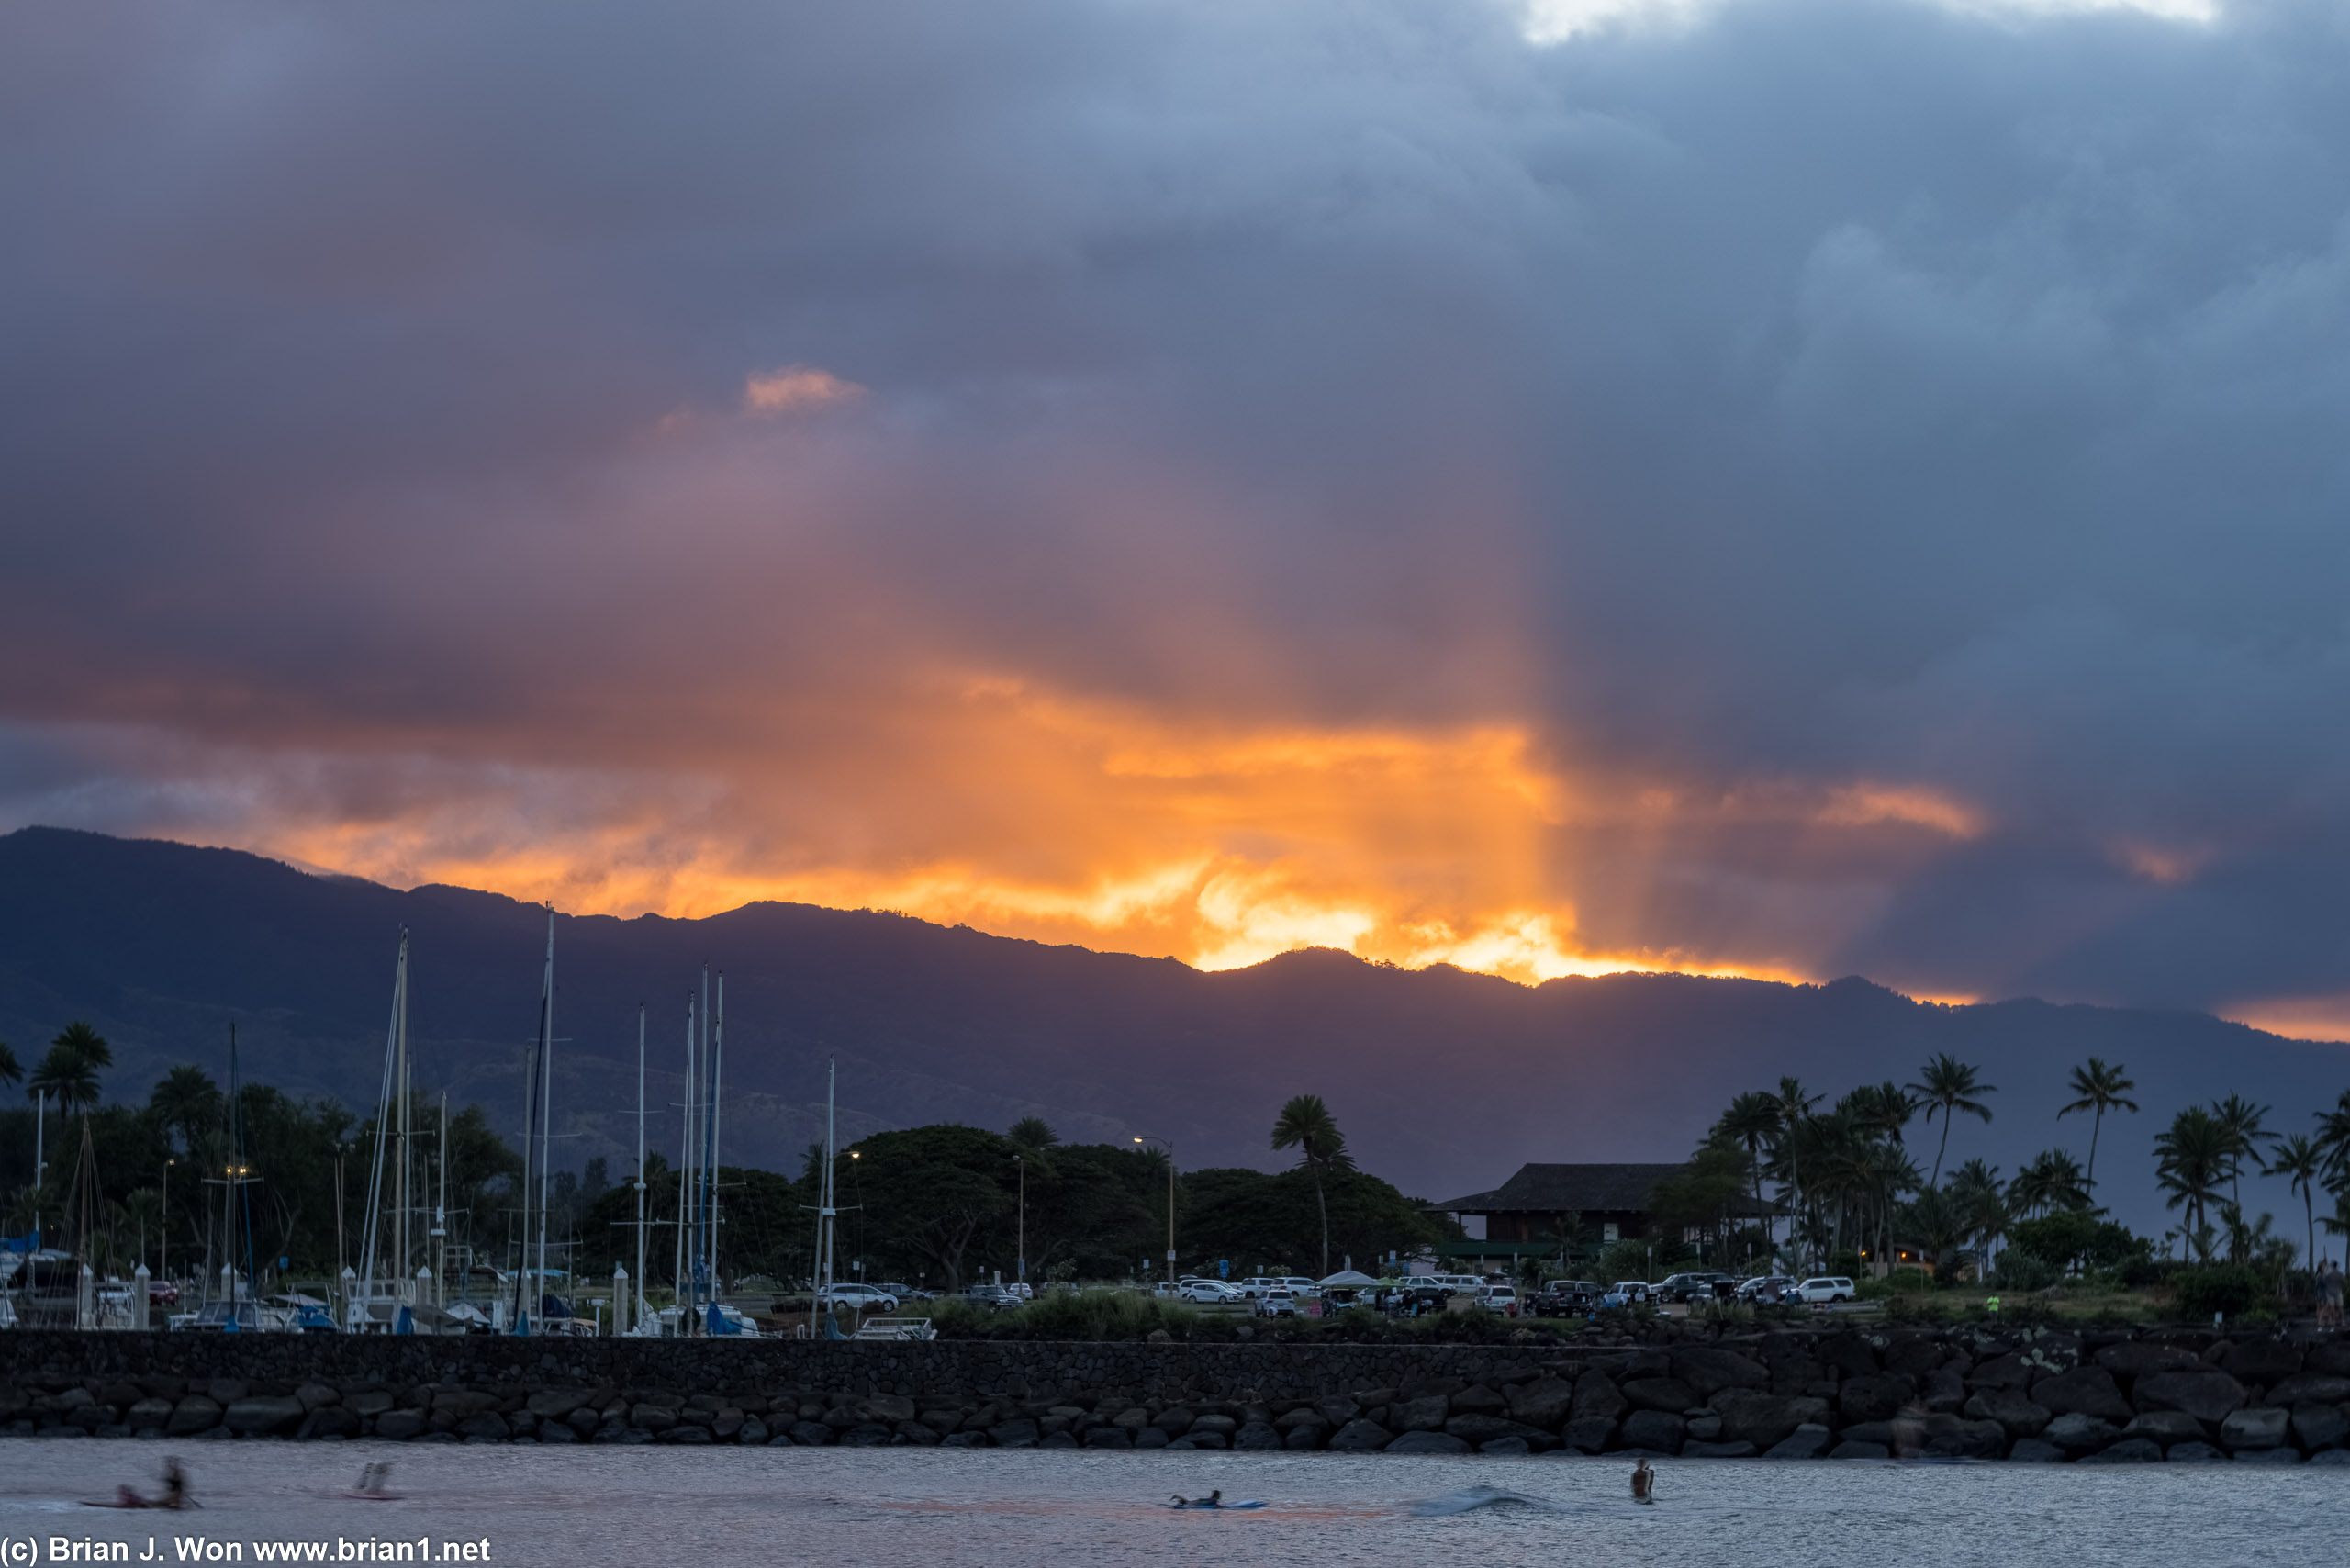 Hale'iwa harbor in the foreground as clouds threaten to extinguish the sunset.